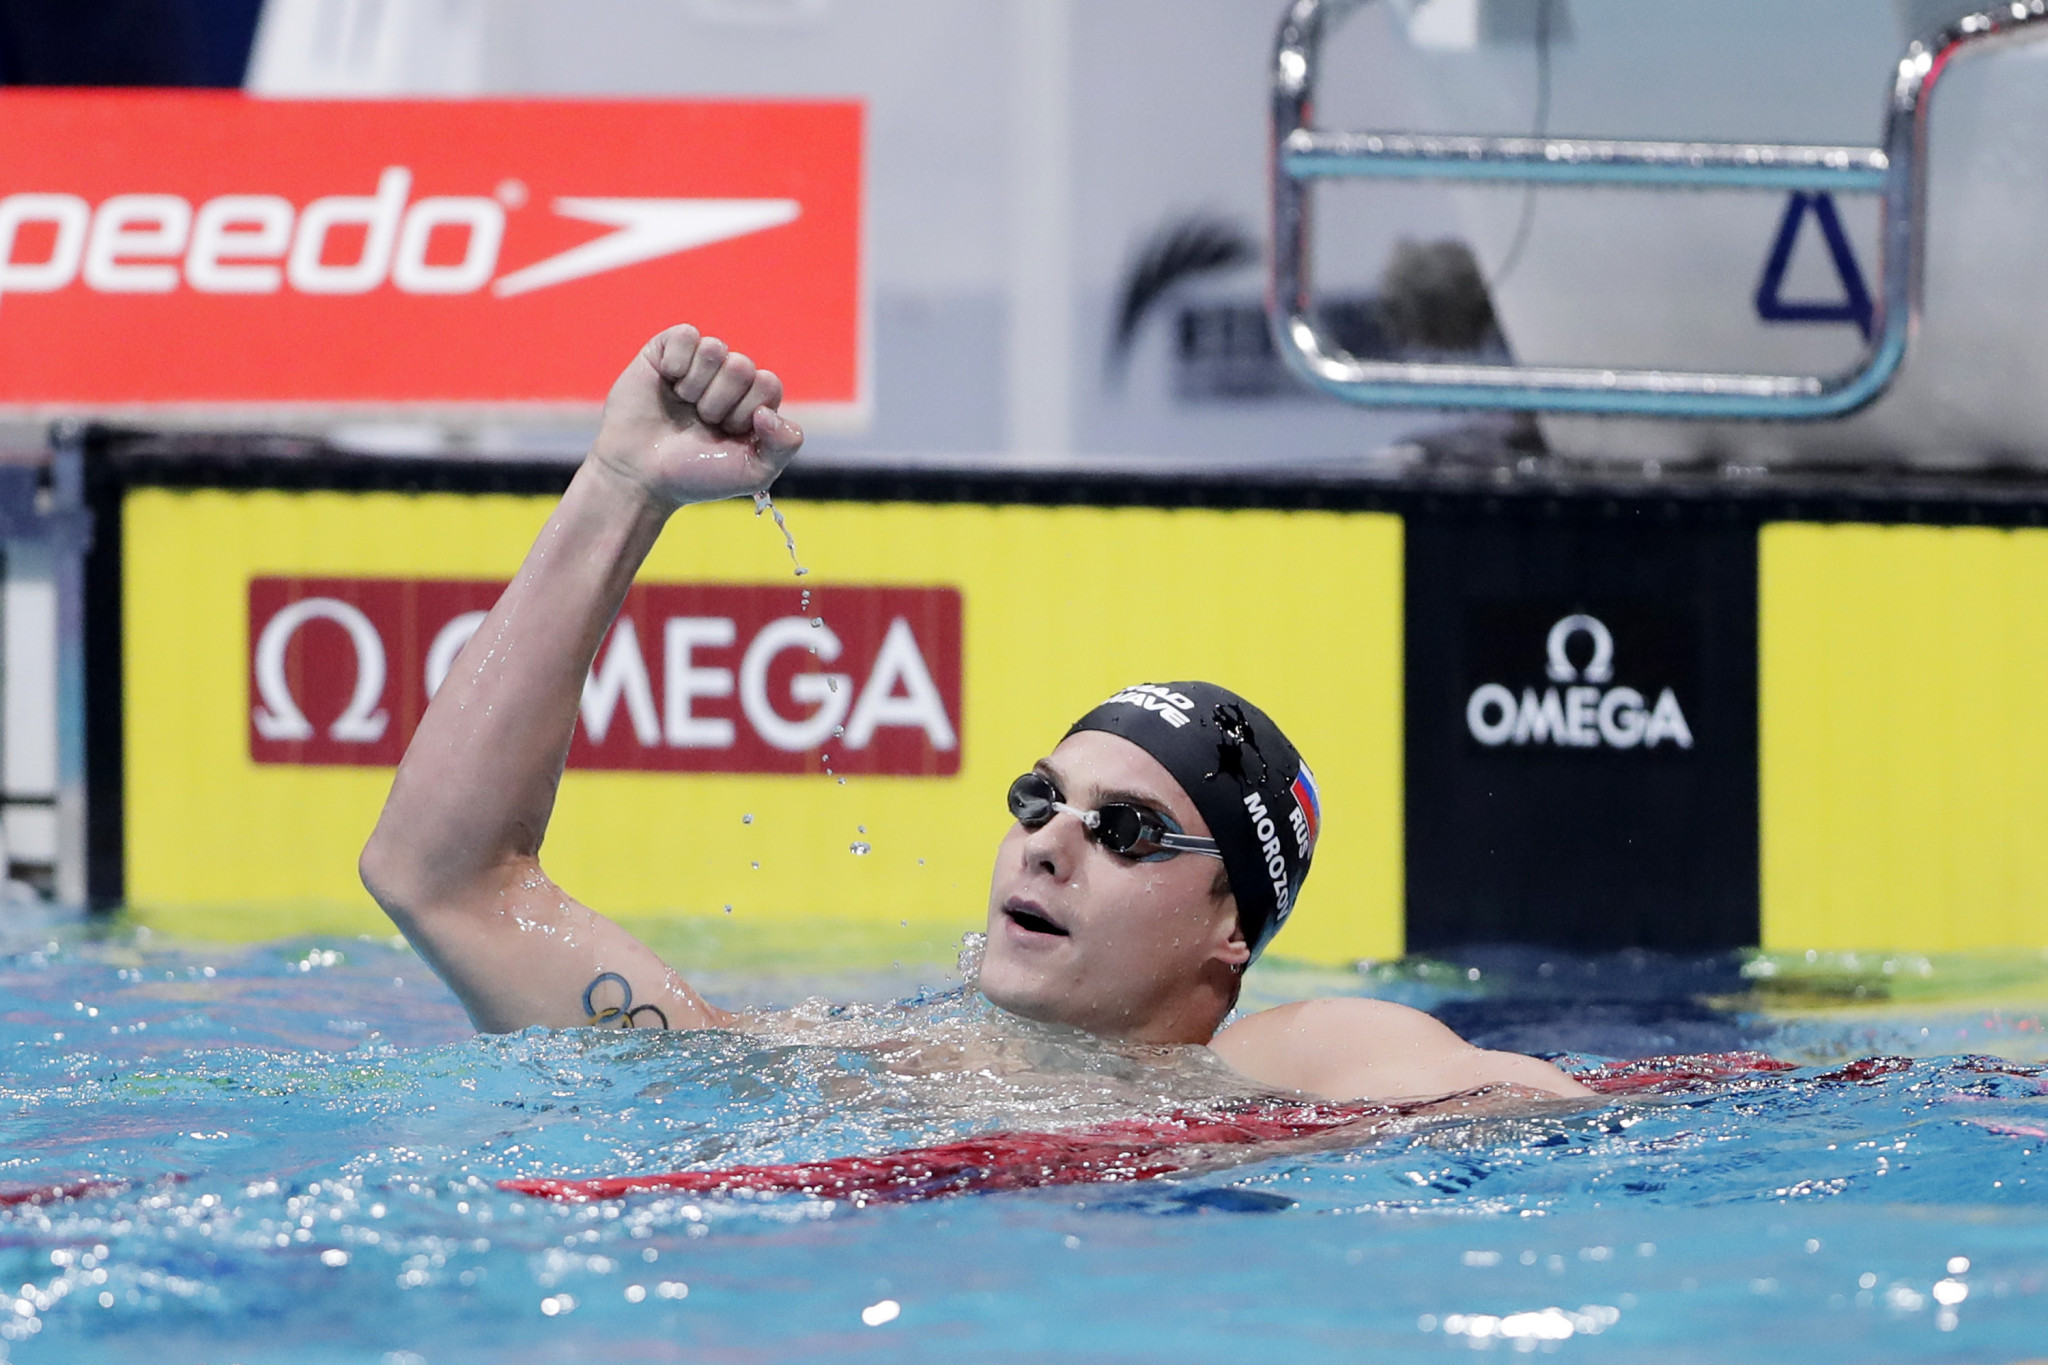 Morozov doubles up to complete FINA World Cup hat-trick in Tokyo